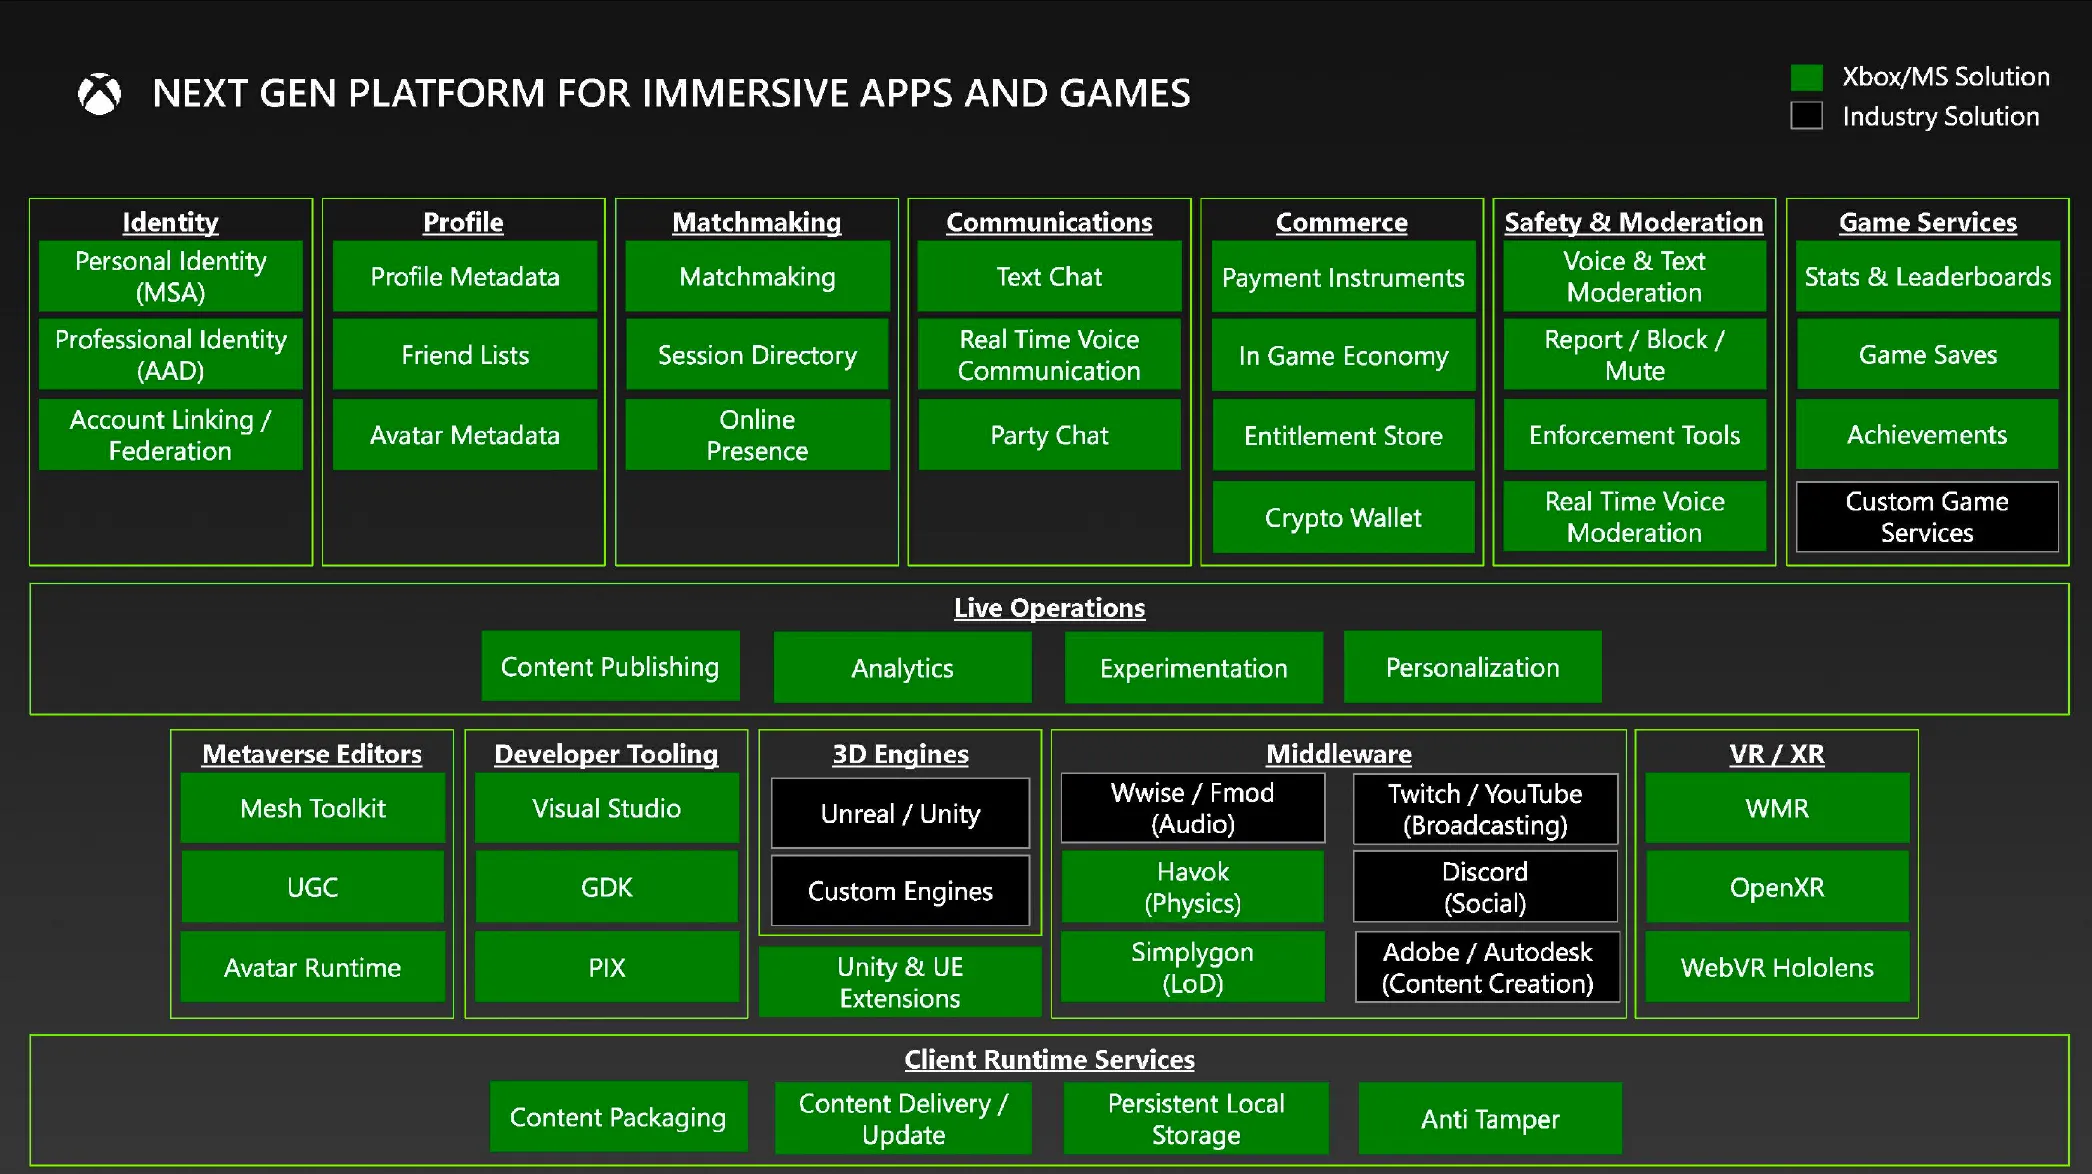 Chart showing Xbox's next-generation console platform plans, including "crypto wallet" under the "commerce" section.